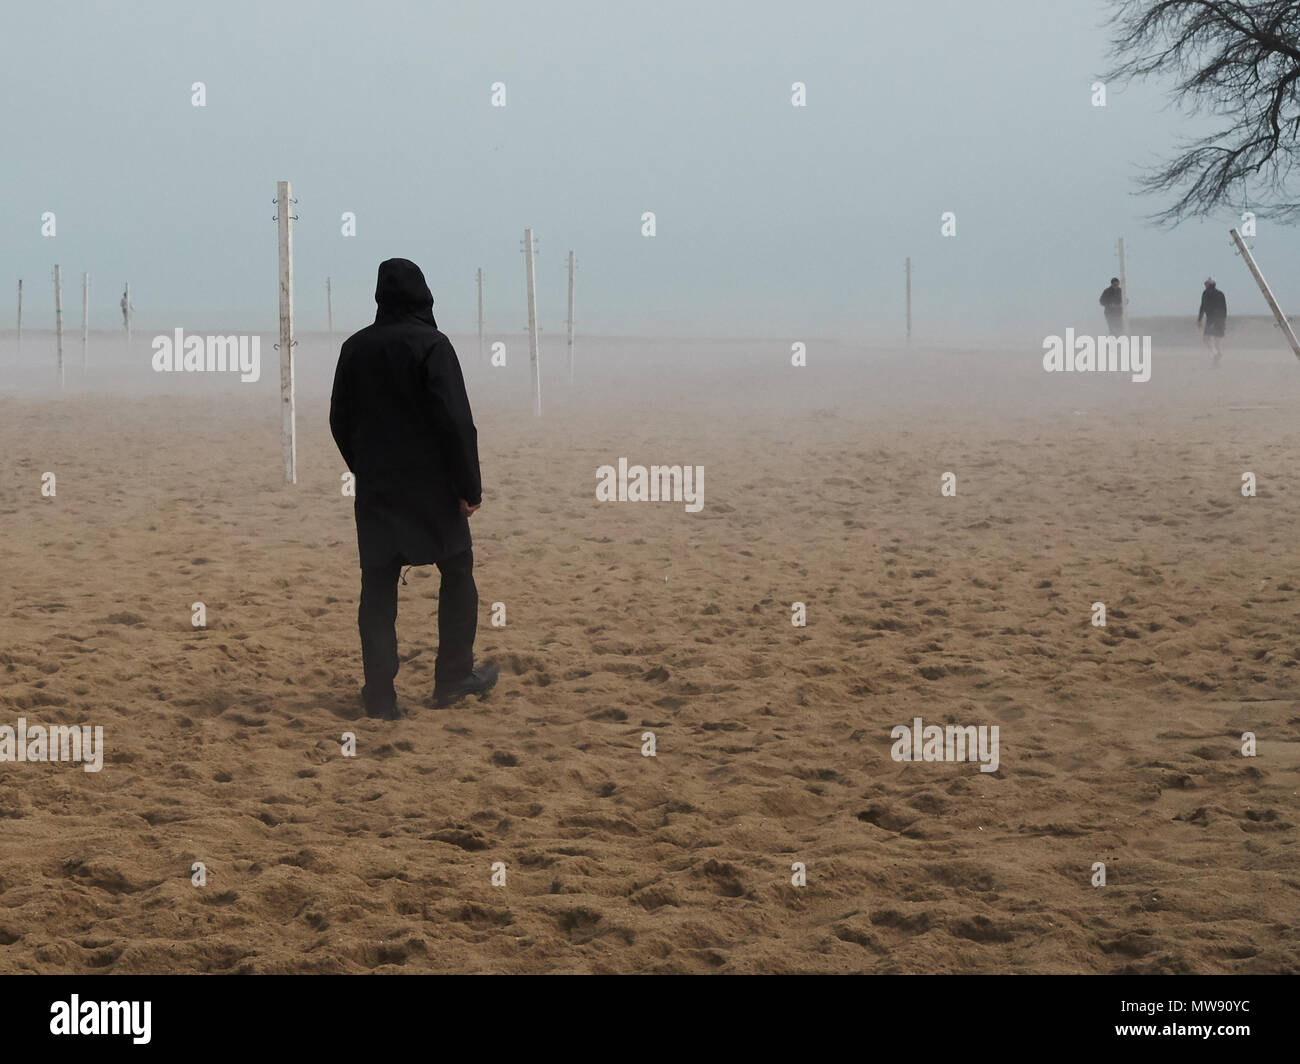 foggy cold spring day along the Chicago lakefront with volley ball poles in distance, silhouette of man walking on the beach in foreground Stock Photo